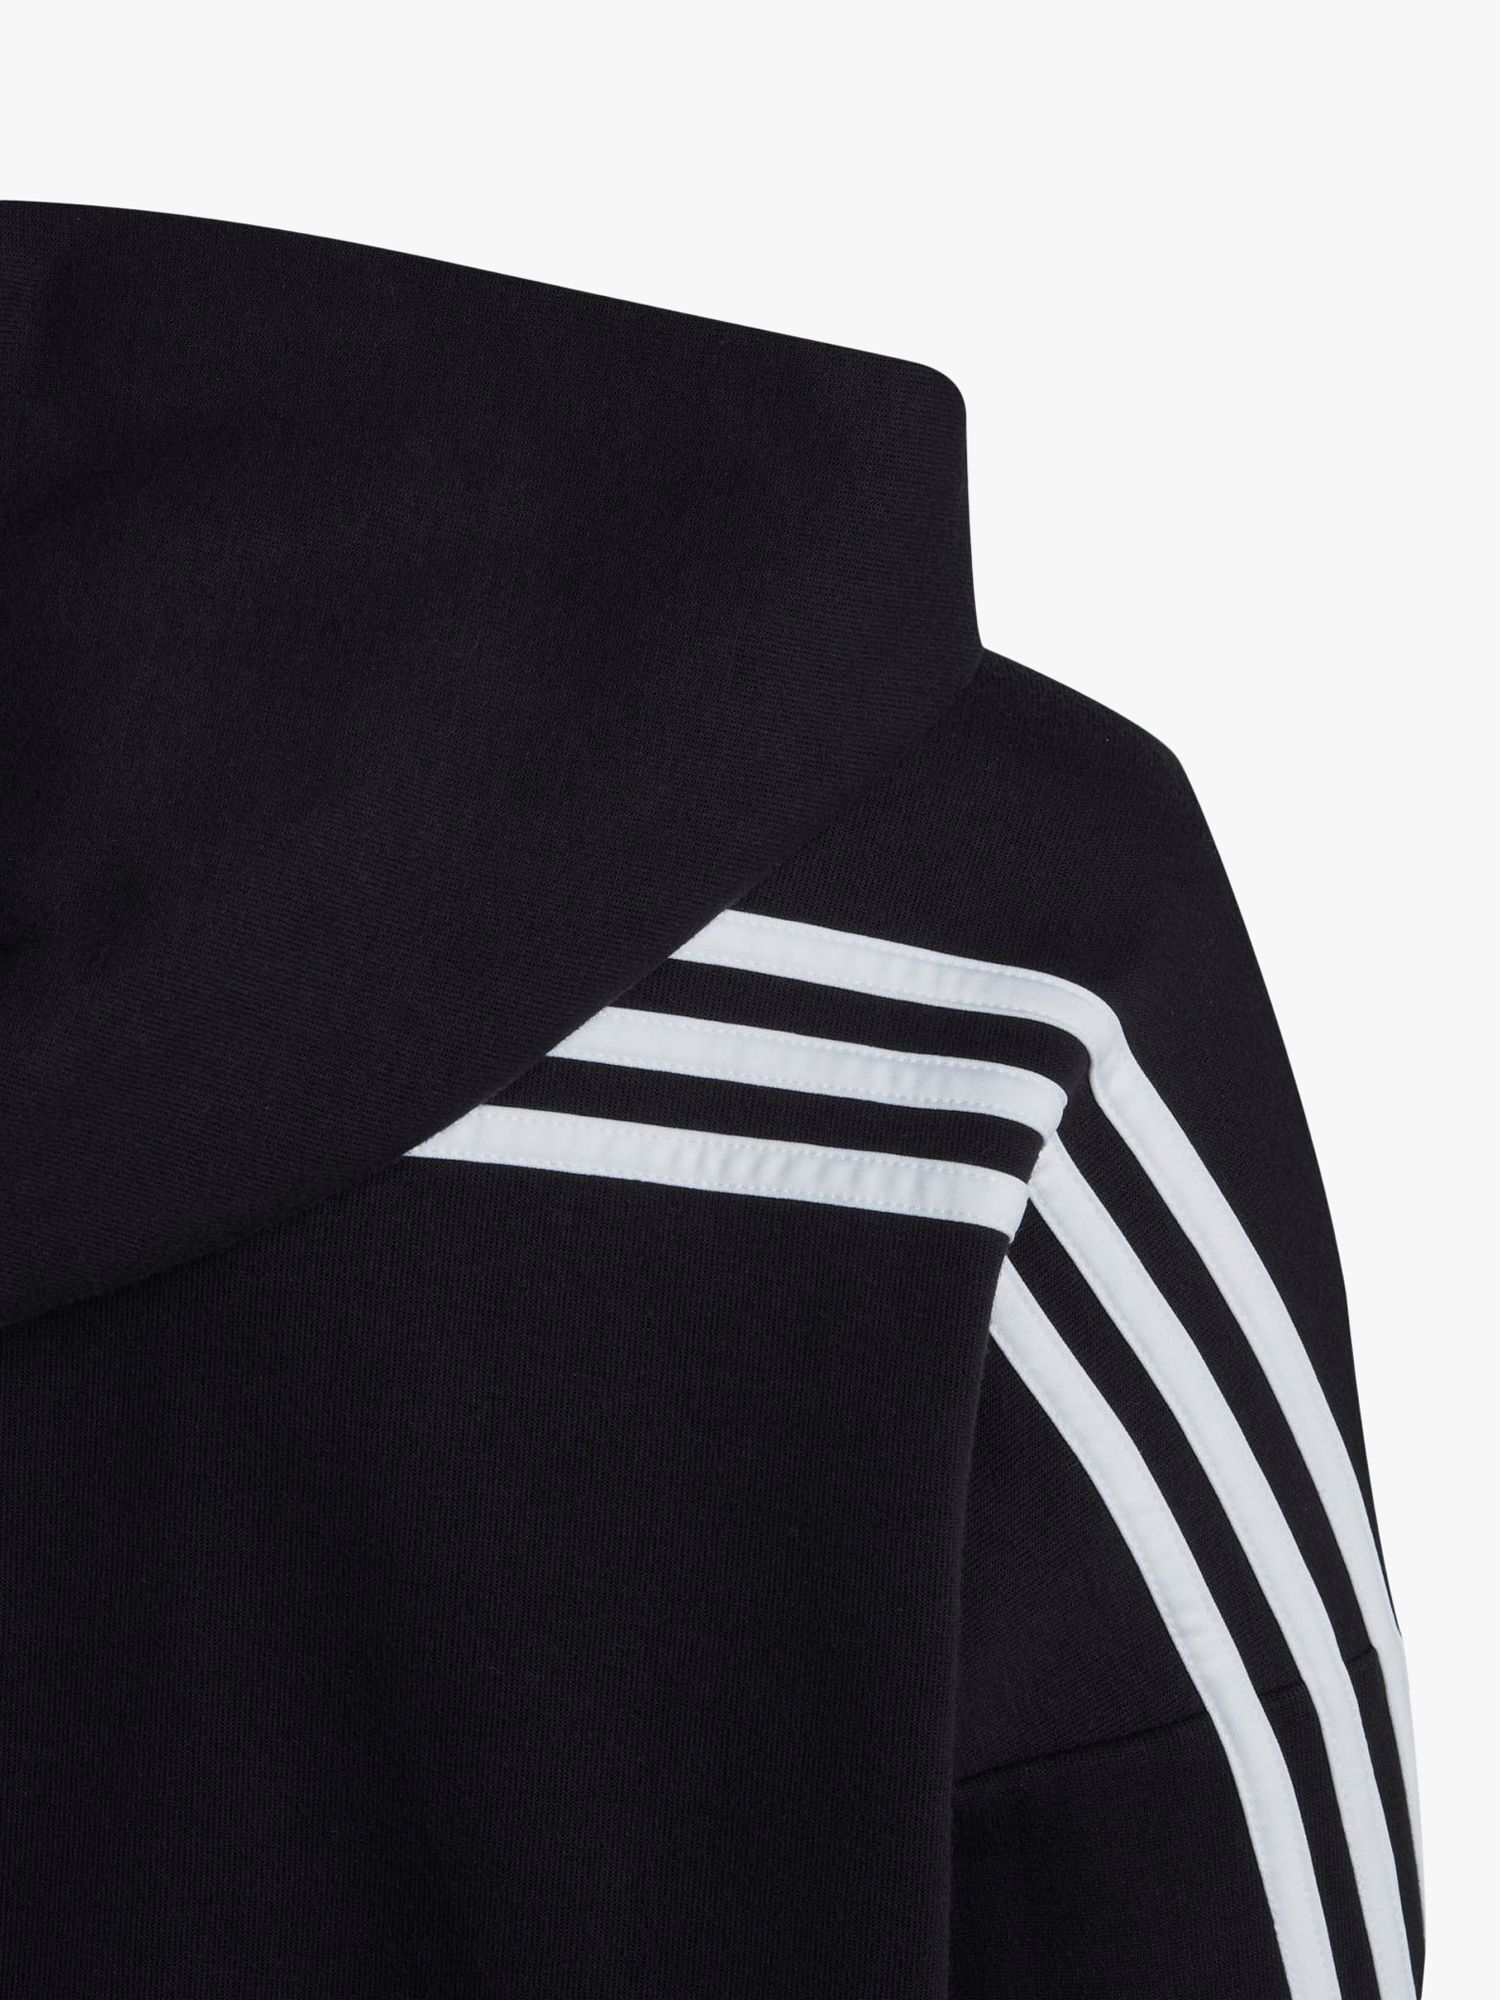 adidas Kids' Future Icons 3 Stripes Full Zip Hooded Tracksuit Top, Black/White, 13-14 years